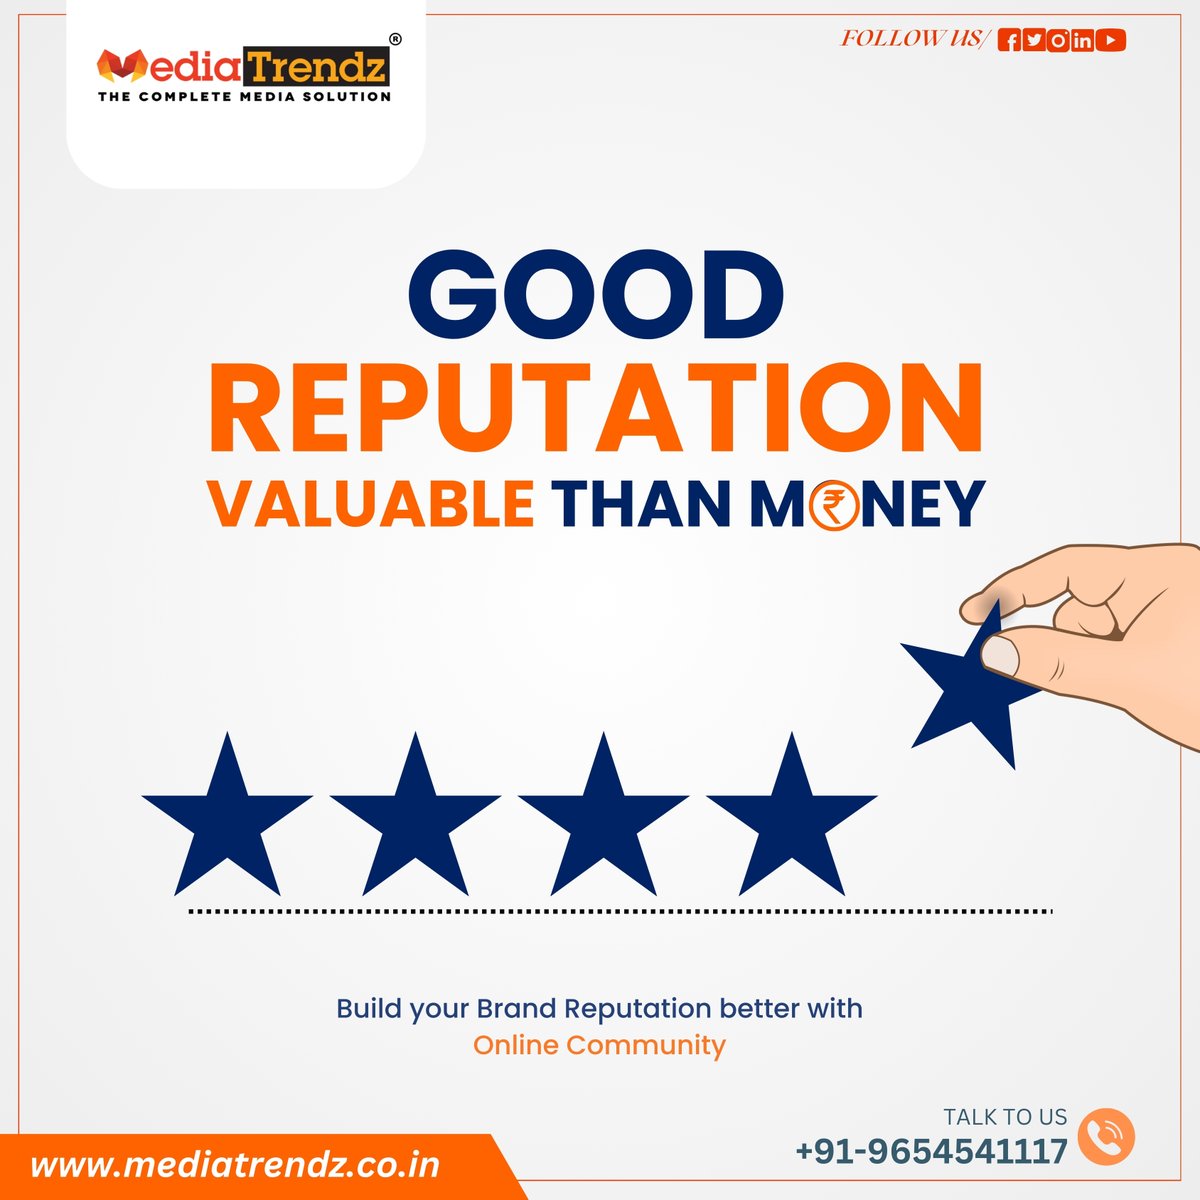 Media Trendz: A Place Where Credibility Rules 🌟
.
In the world of digital marketing, we know that a company's reputation is quite valuable
.
#MediaTrendz #DigitalMarketing #ReputationManagement #BrandReputation #OnlinePresence #BrandExcellence #CustomerSatisfaction #Trustworthy